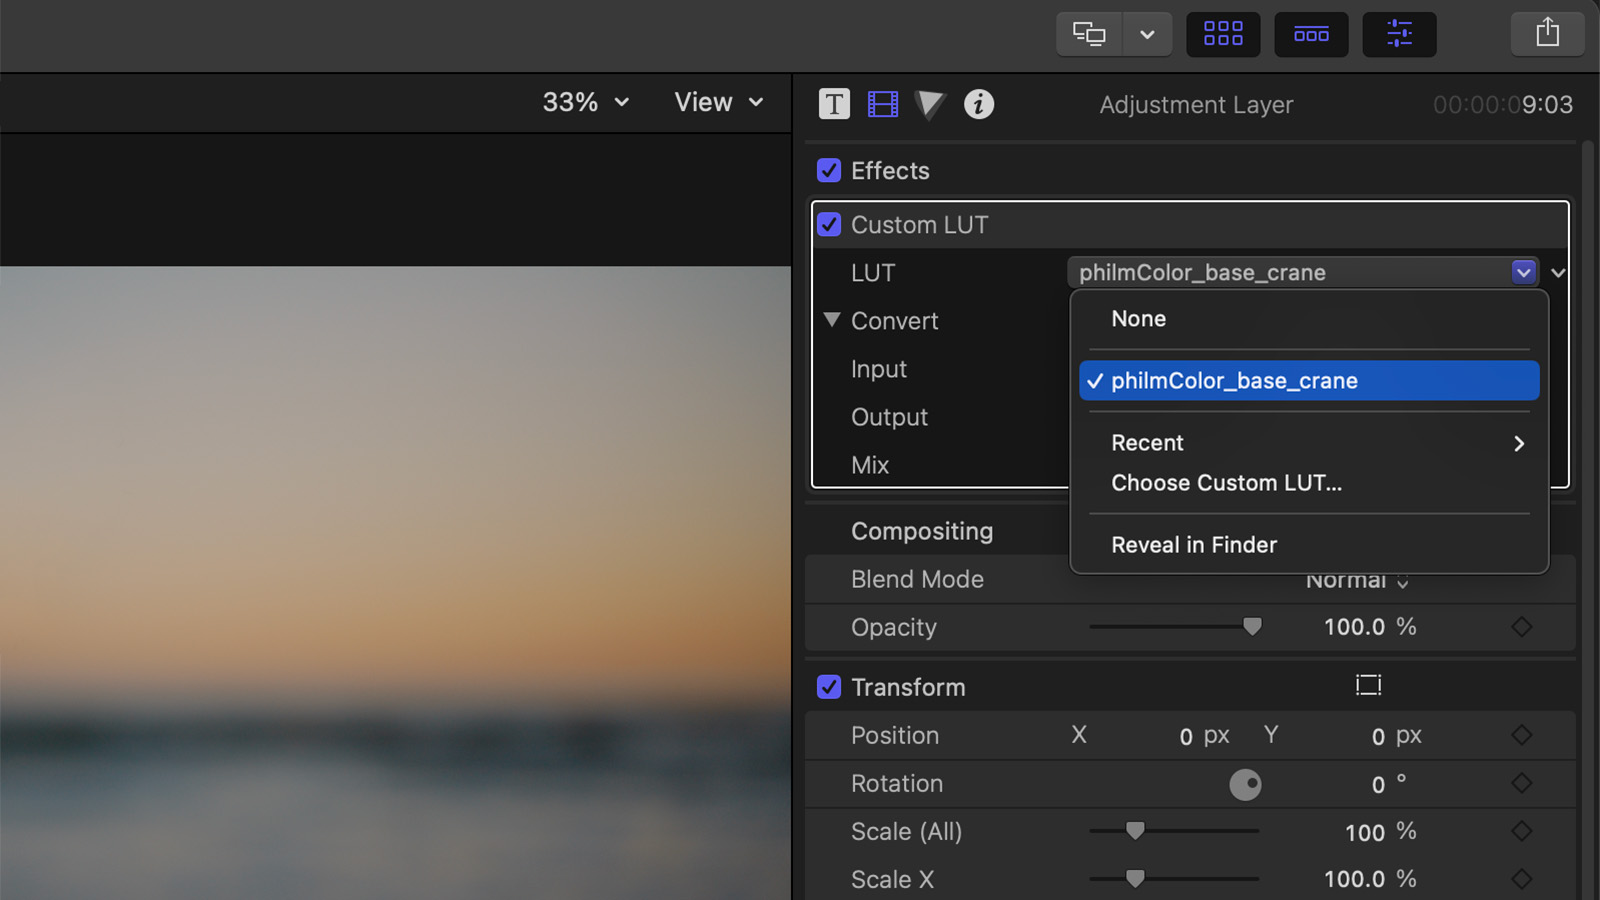 You can add a custom LUT to your new Adjustment Layer.